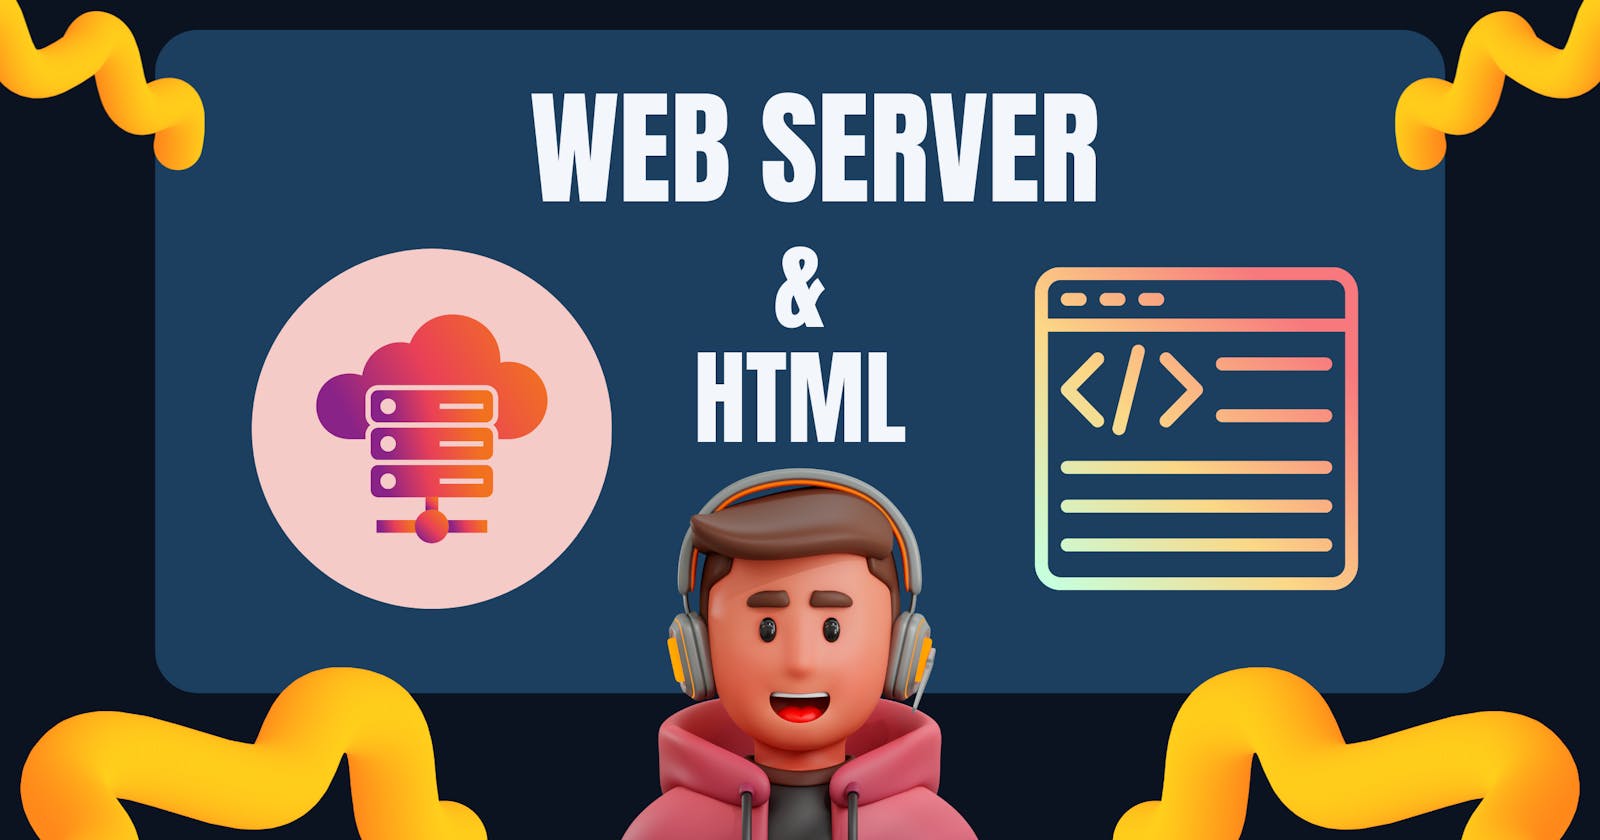 Let's Discuss About Webserver And HTML